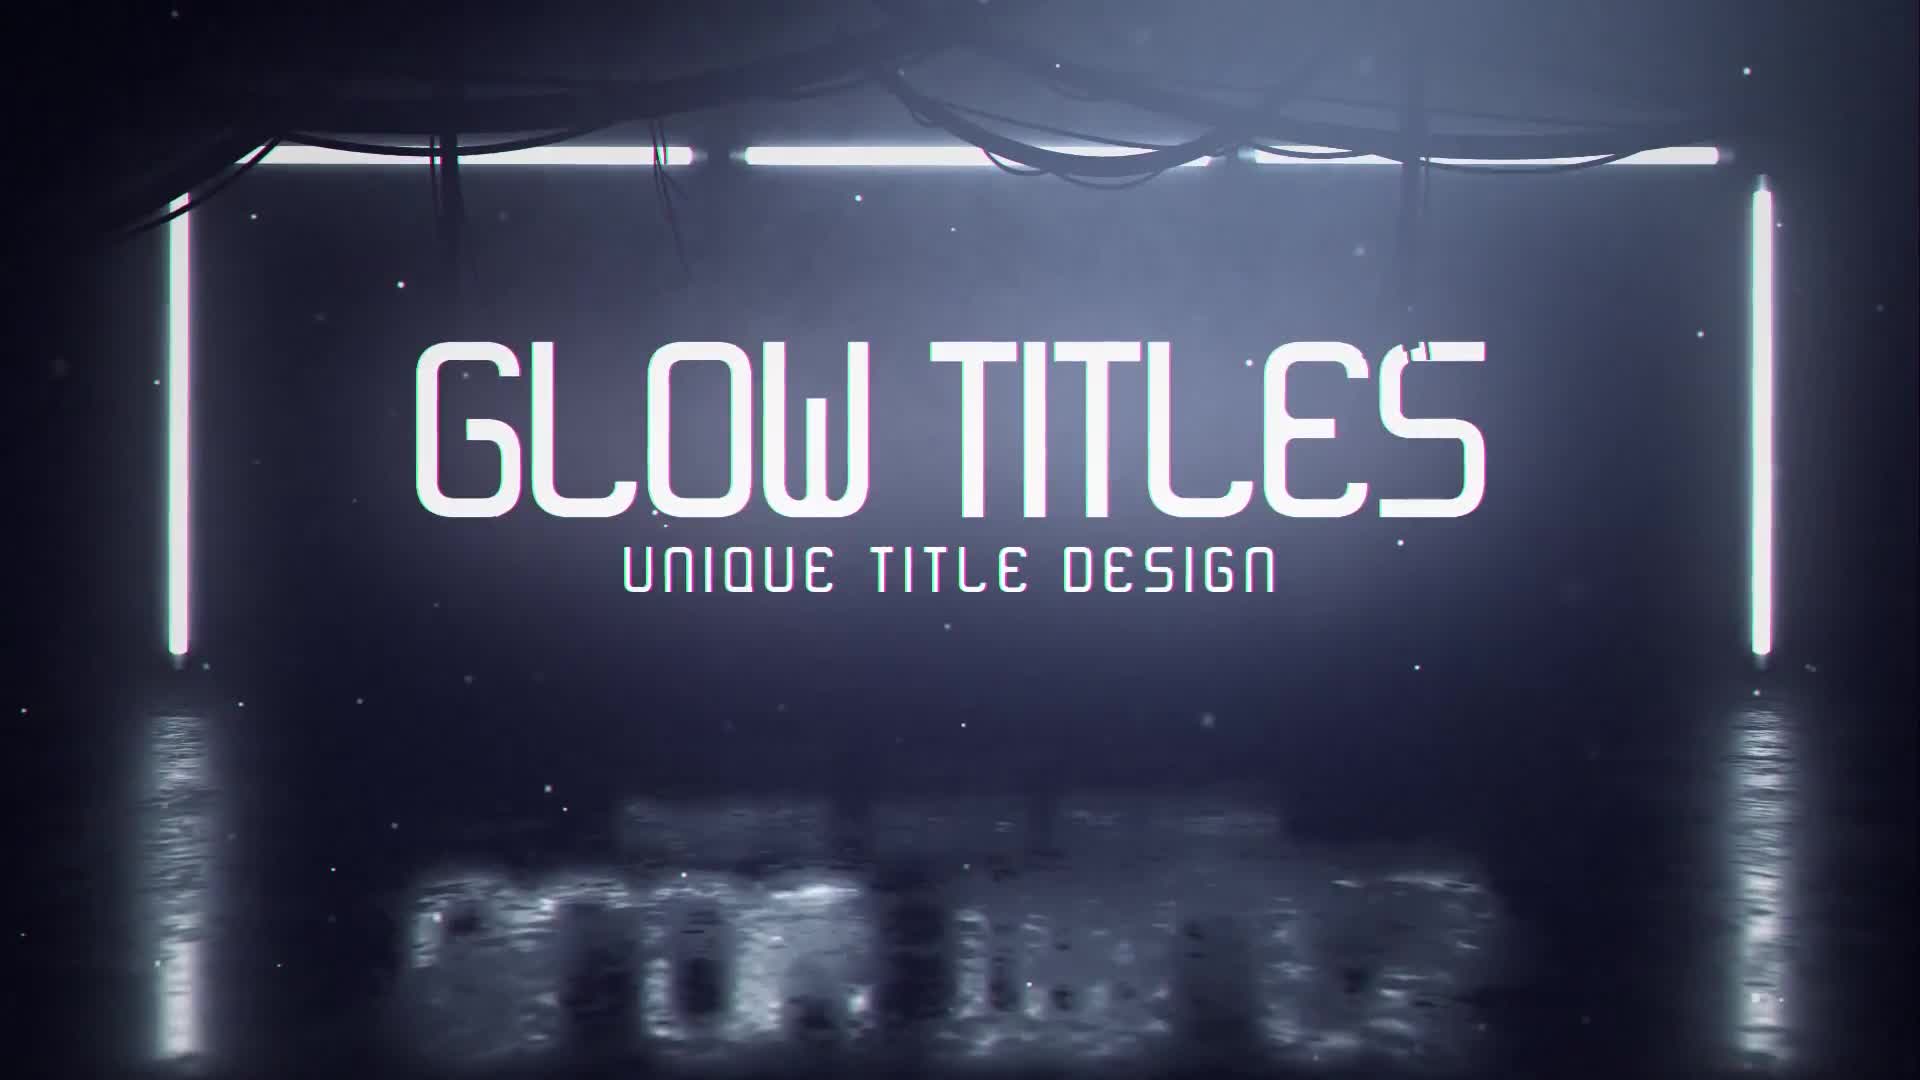 Glow Title - Download Videohive 22846990